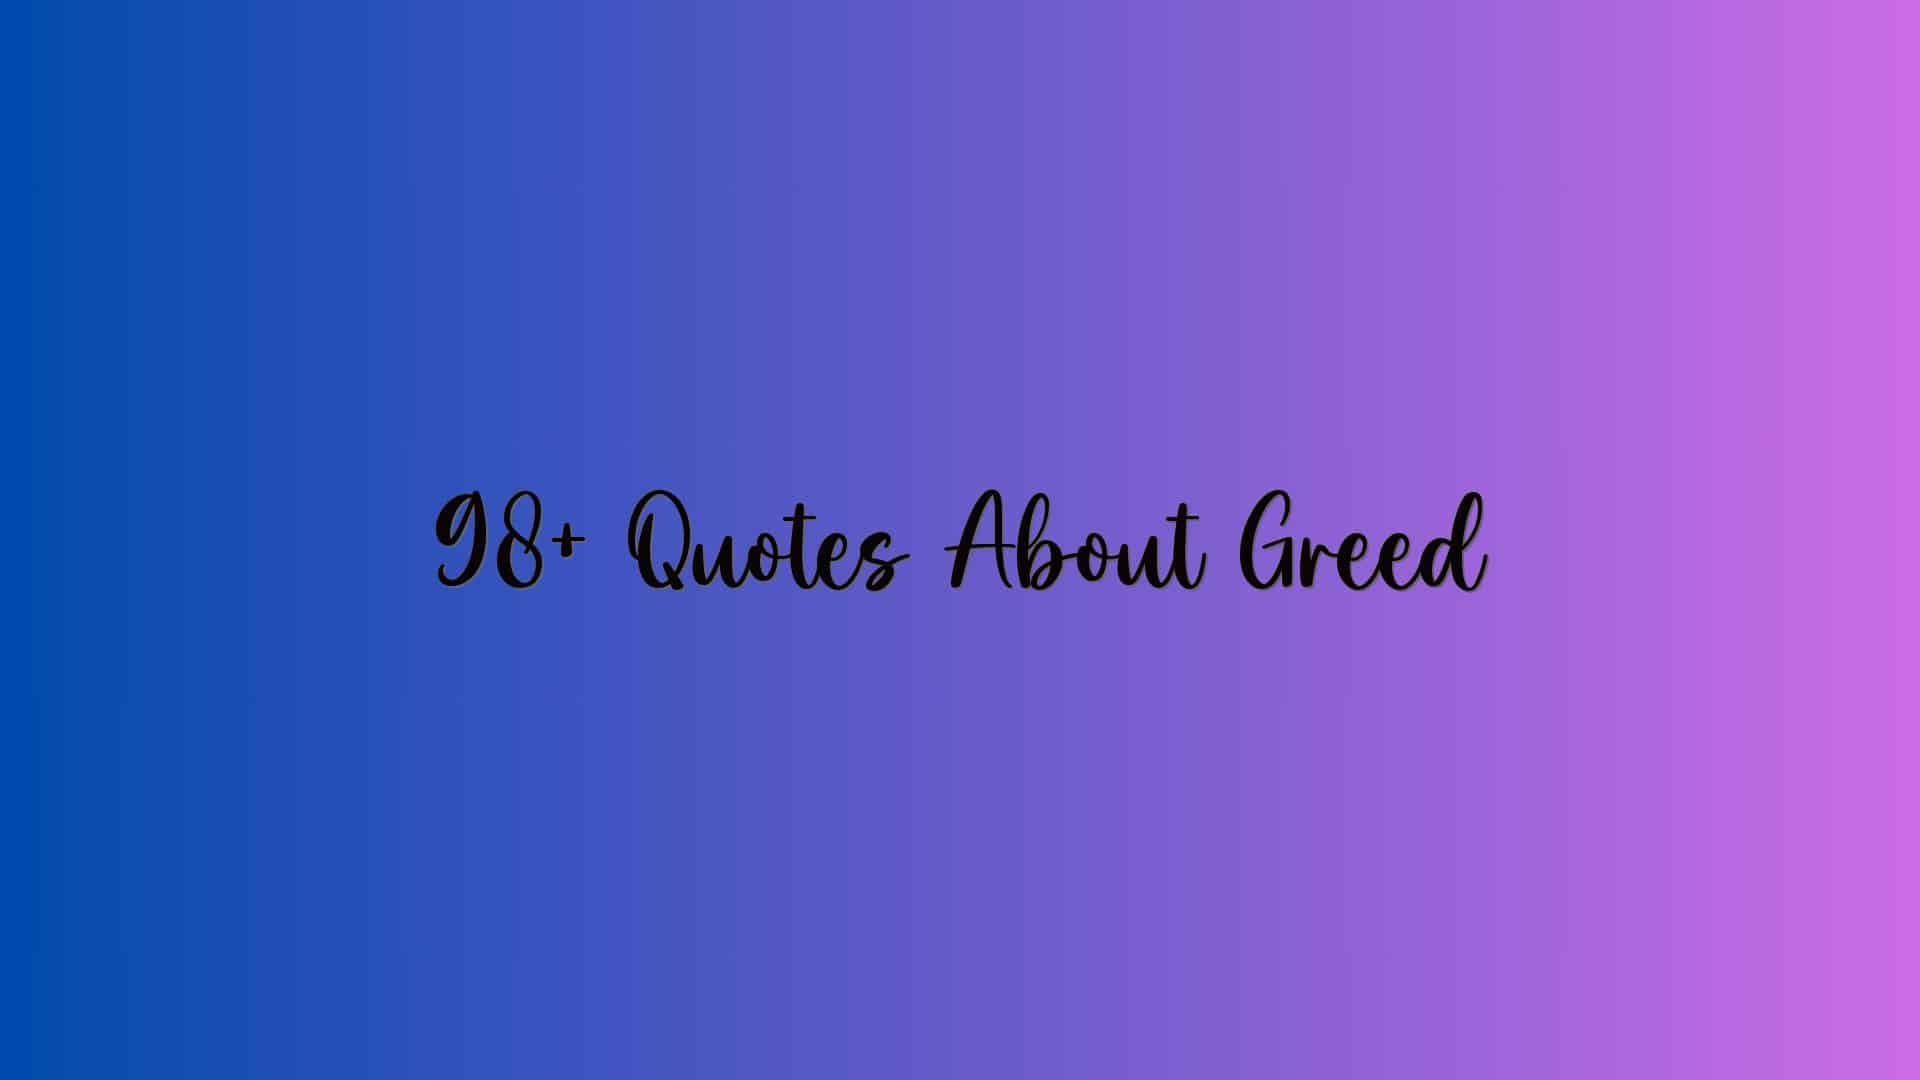 98+ Quotes About Greed